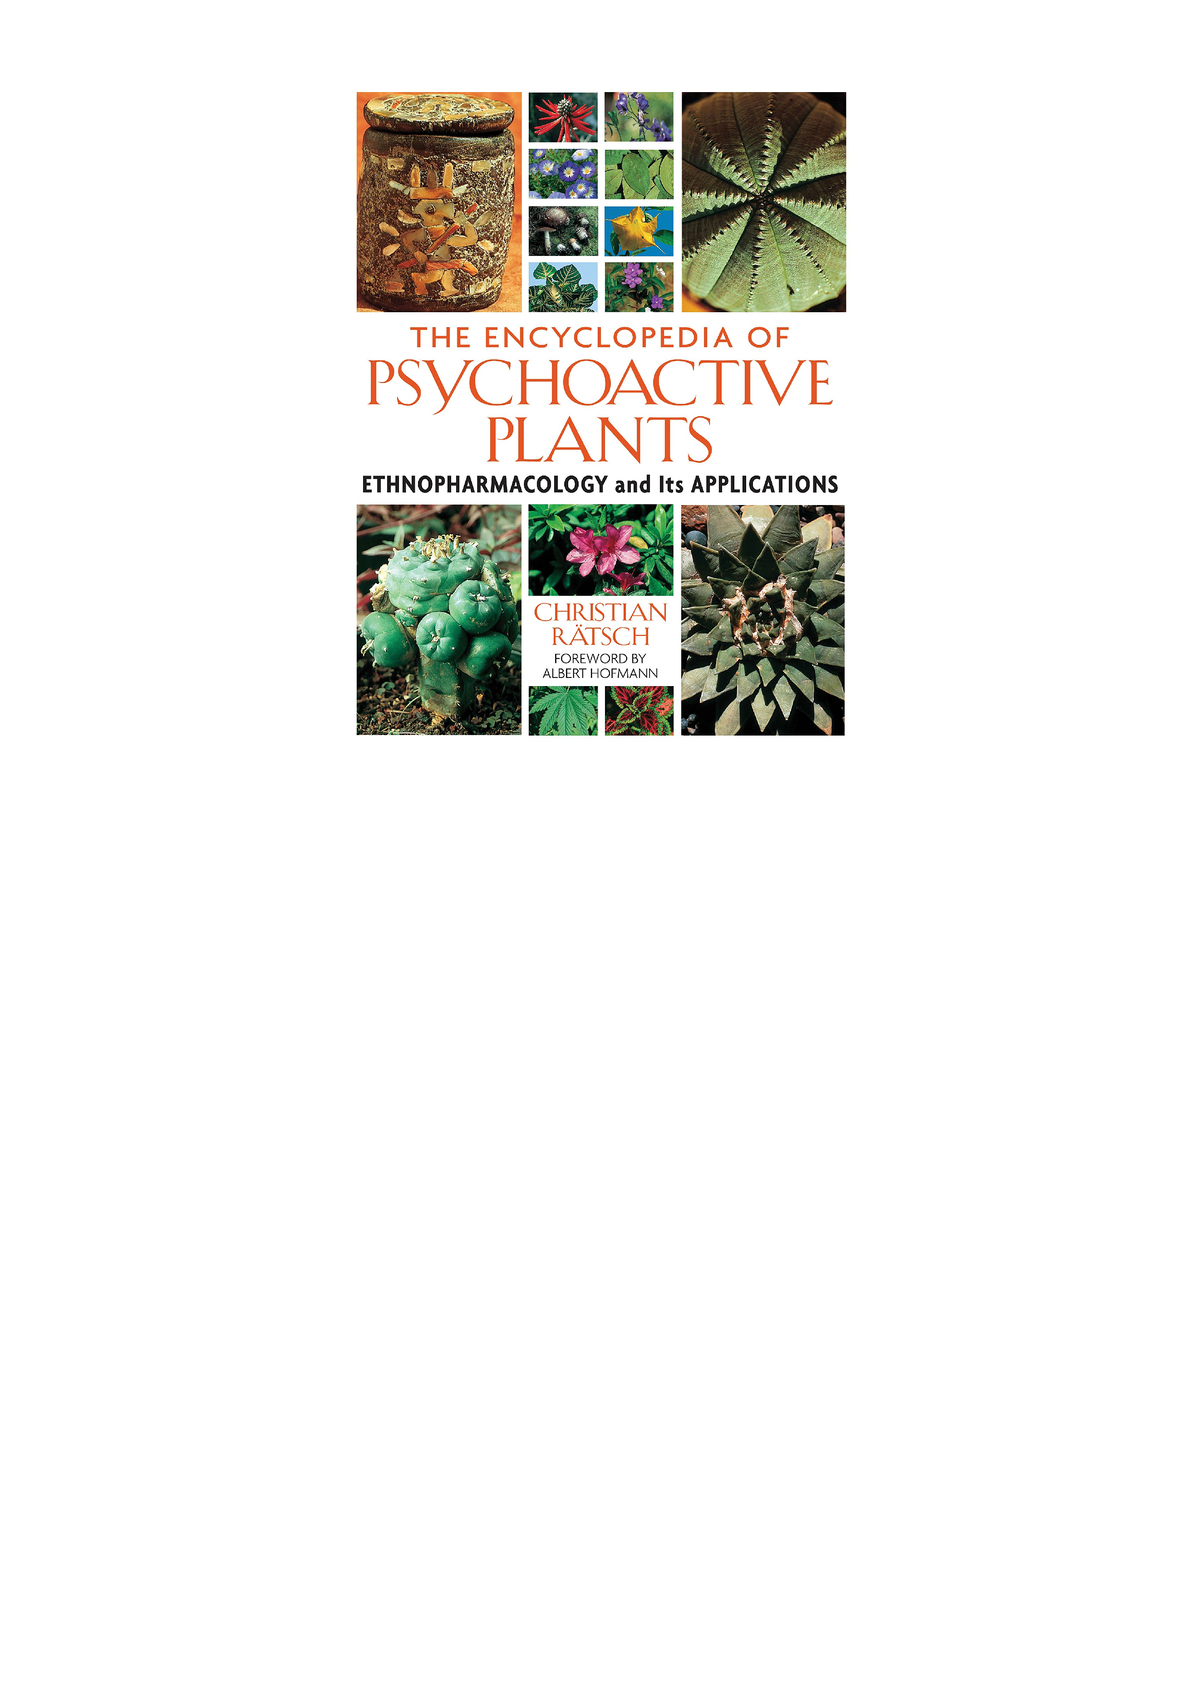 PDF The Encyclopedia of Psychoactive Plants: Ethnopharmacology and